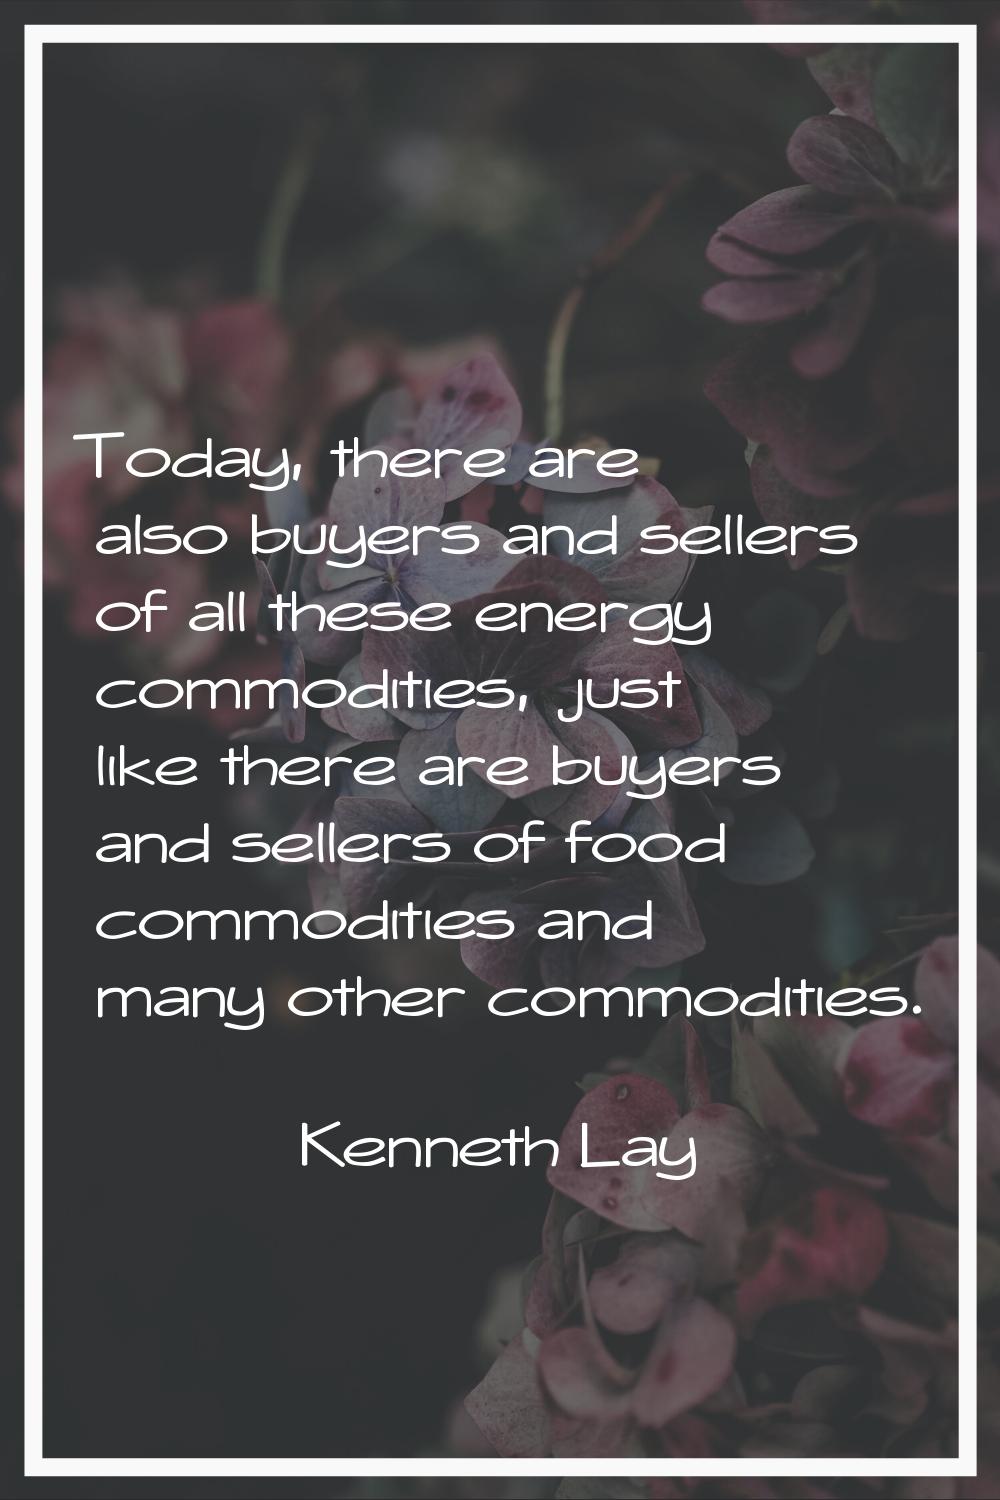 Today, there are also buyers and sellers of all these energy commodities, just like there are buyer